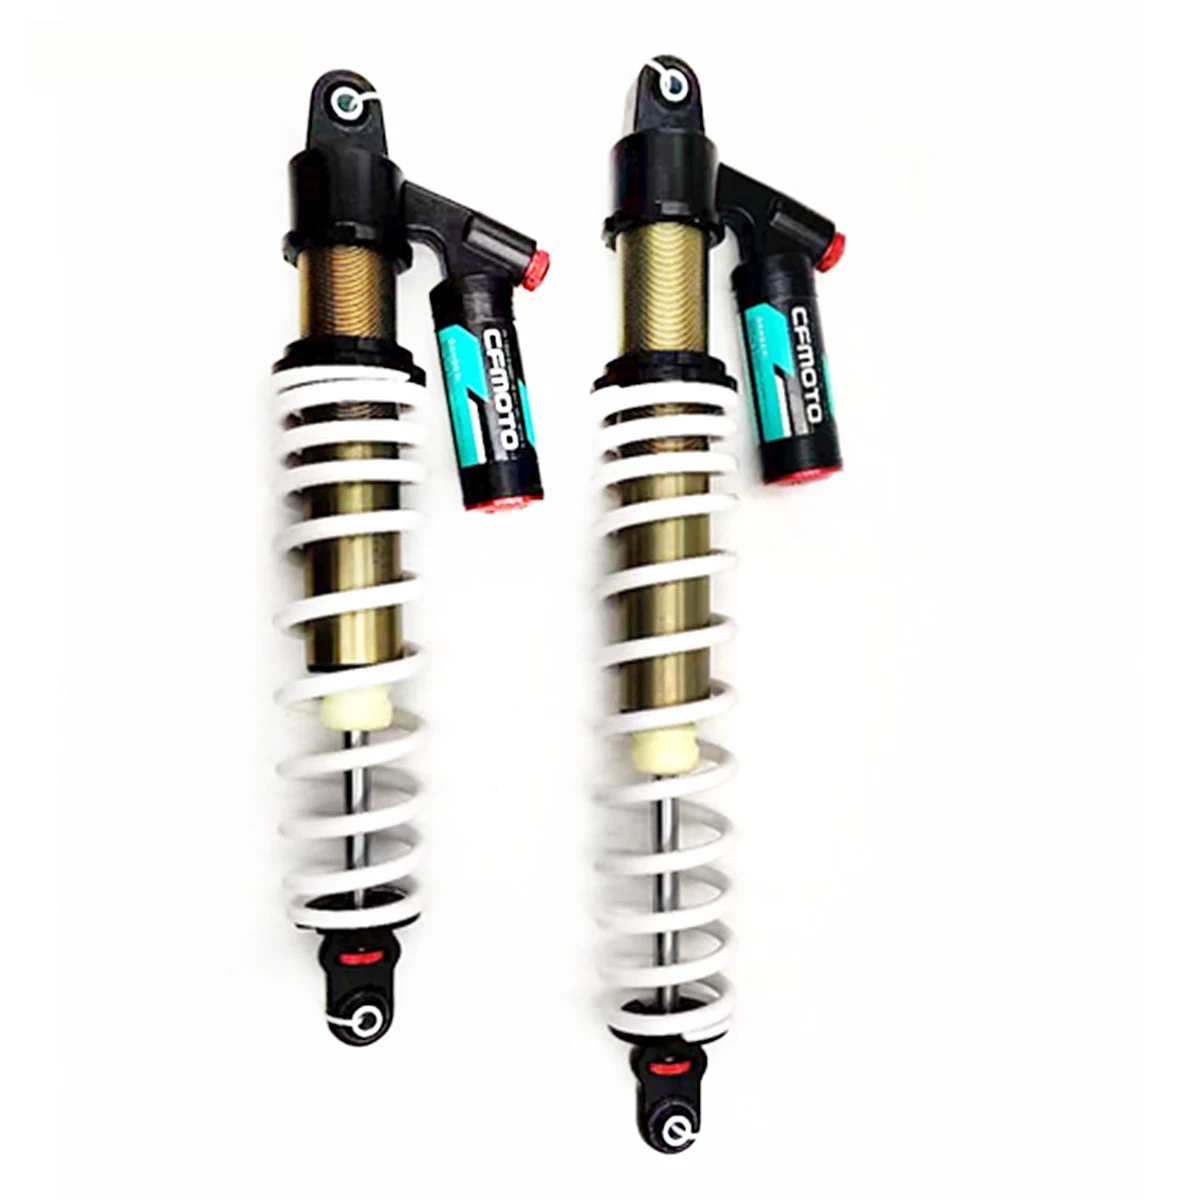 1Pc Front and 1Pc Rear SHOCK ABSORBER For CFMOTO ZForce 500 800 1000 SSV QUAD GO KART 7000-050500-20000 7000-060500-20000